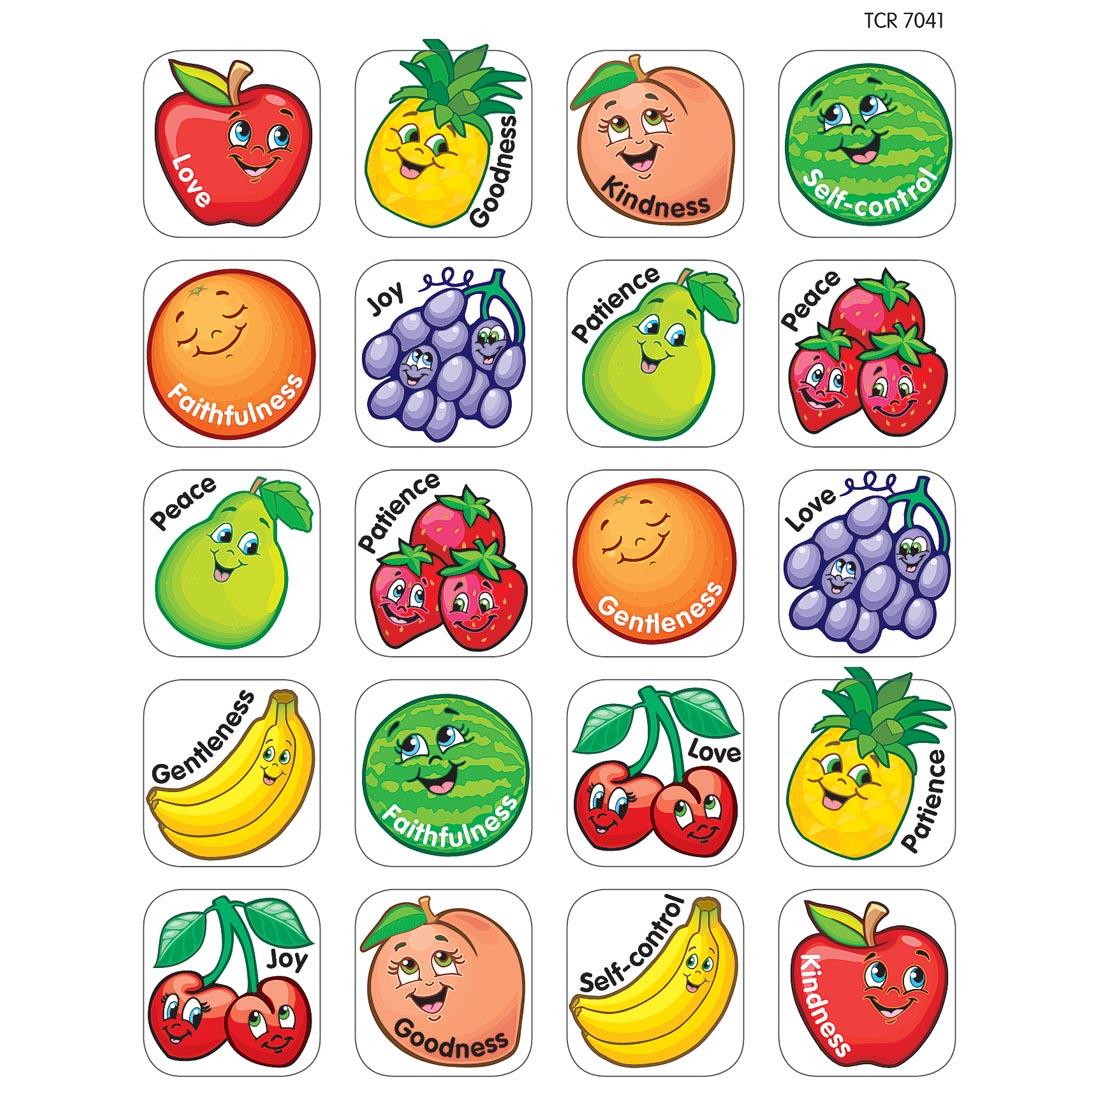 Fruit of the Spirit Stickers have the words love, goodness, kindness, self-control, faithfulness, joy, patience, peace and gentleness